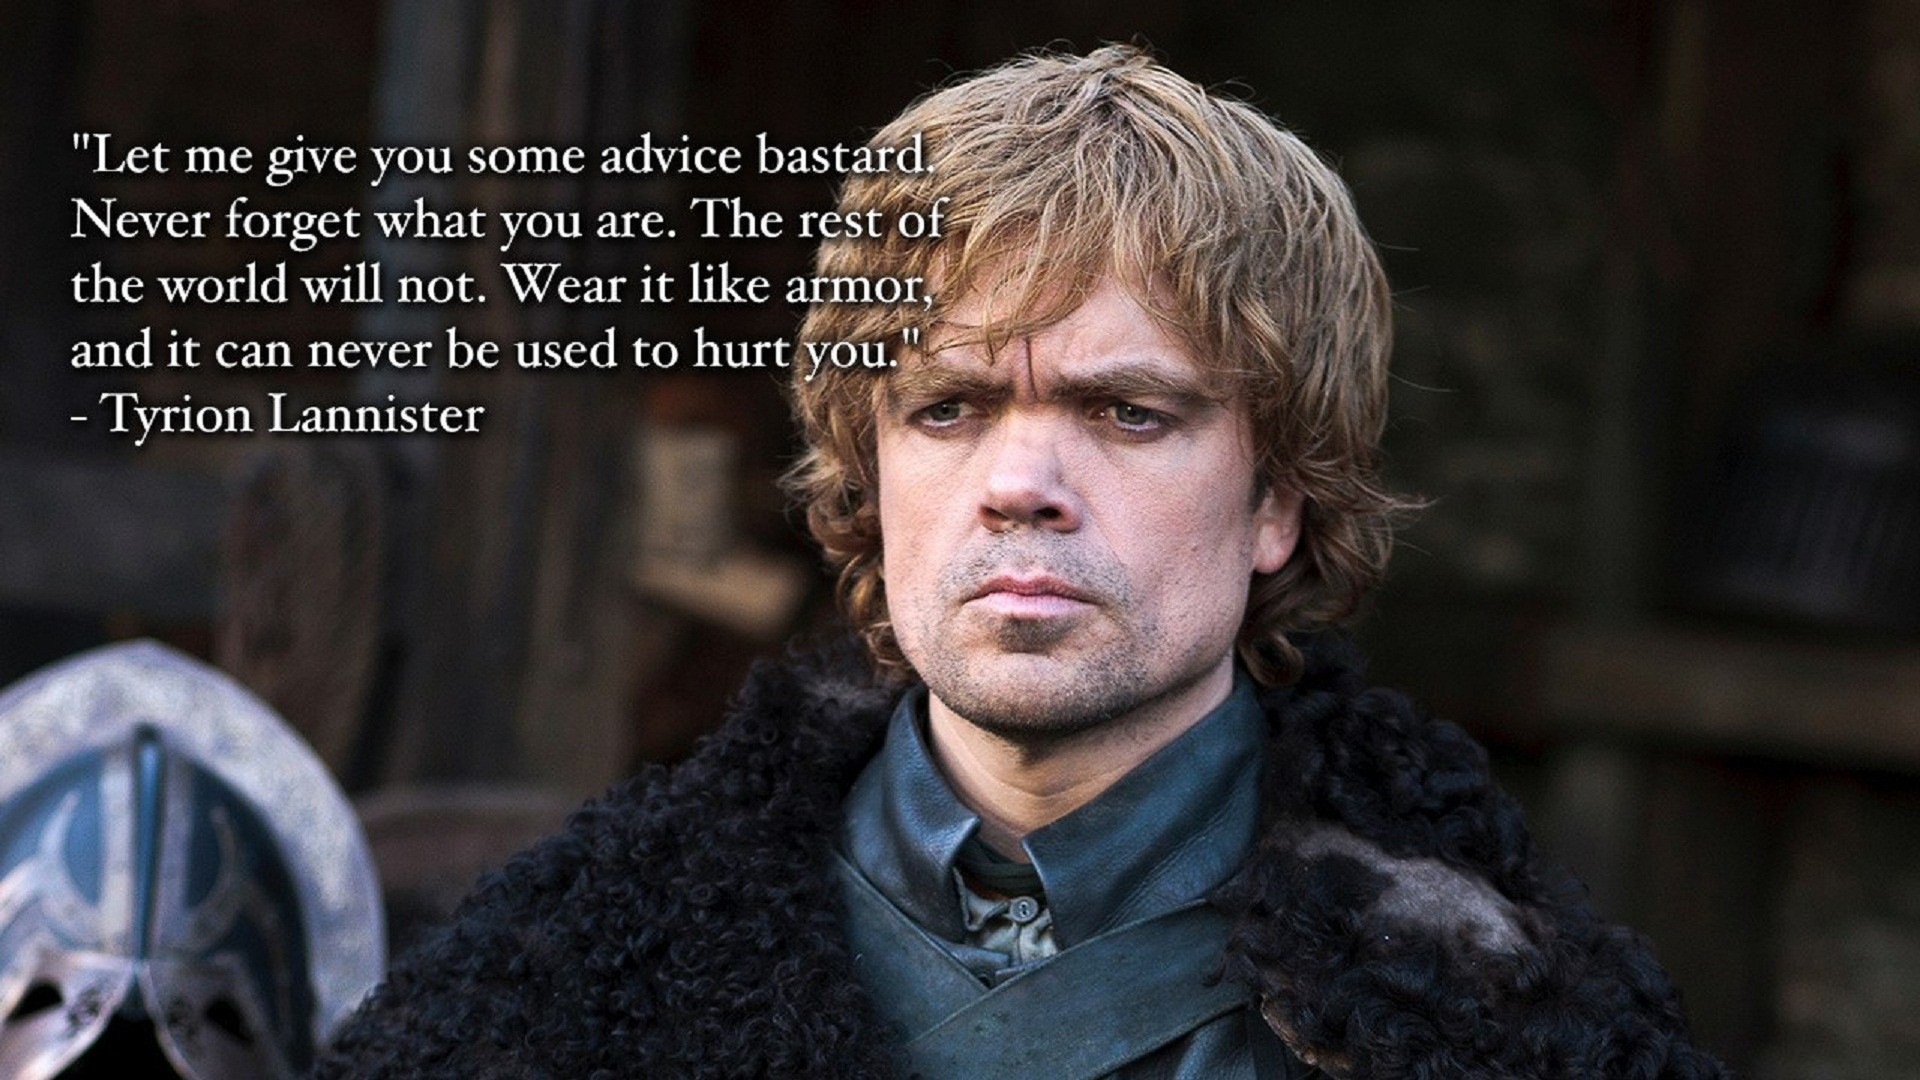 People 1920x1080 Game of Thrones Tyrion Lannister quote Peter Dinklage TV series men